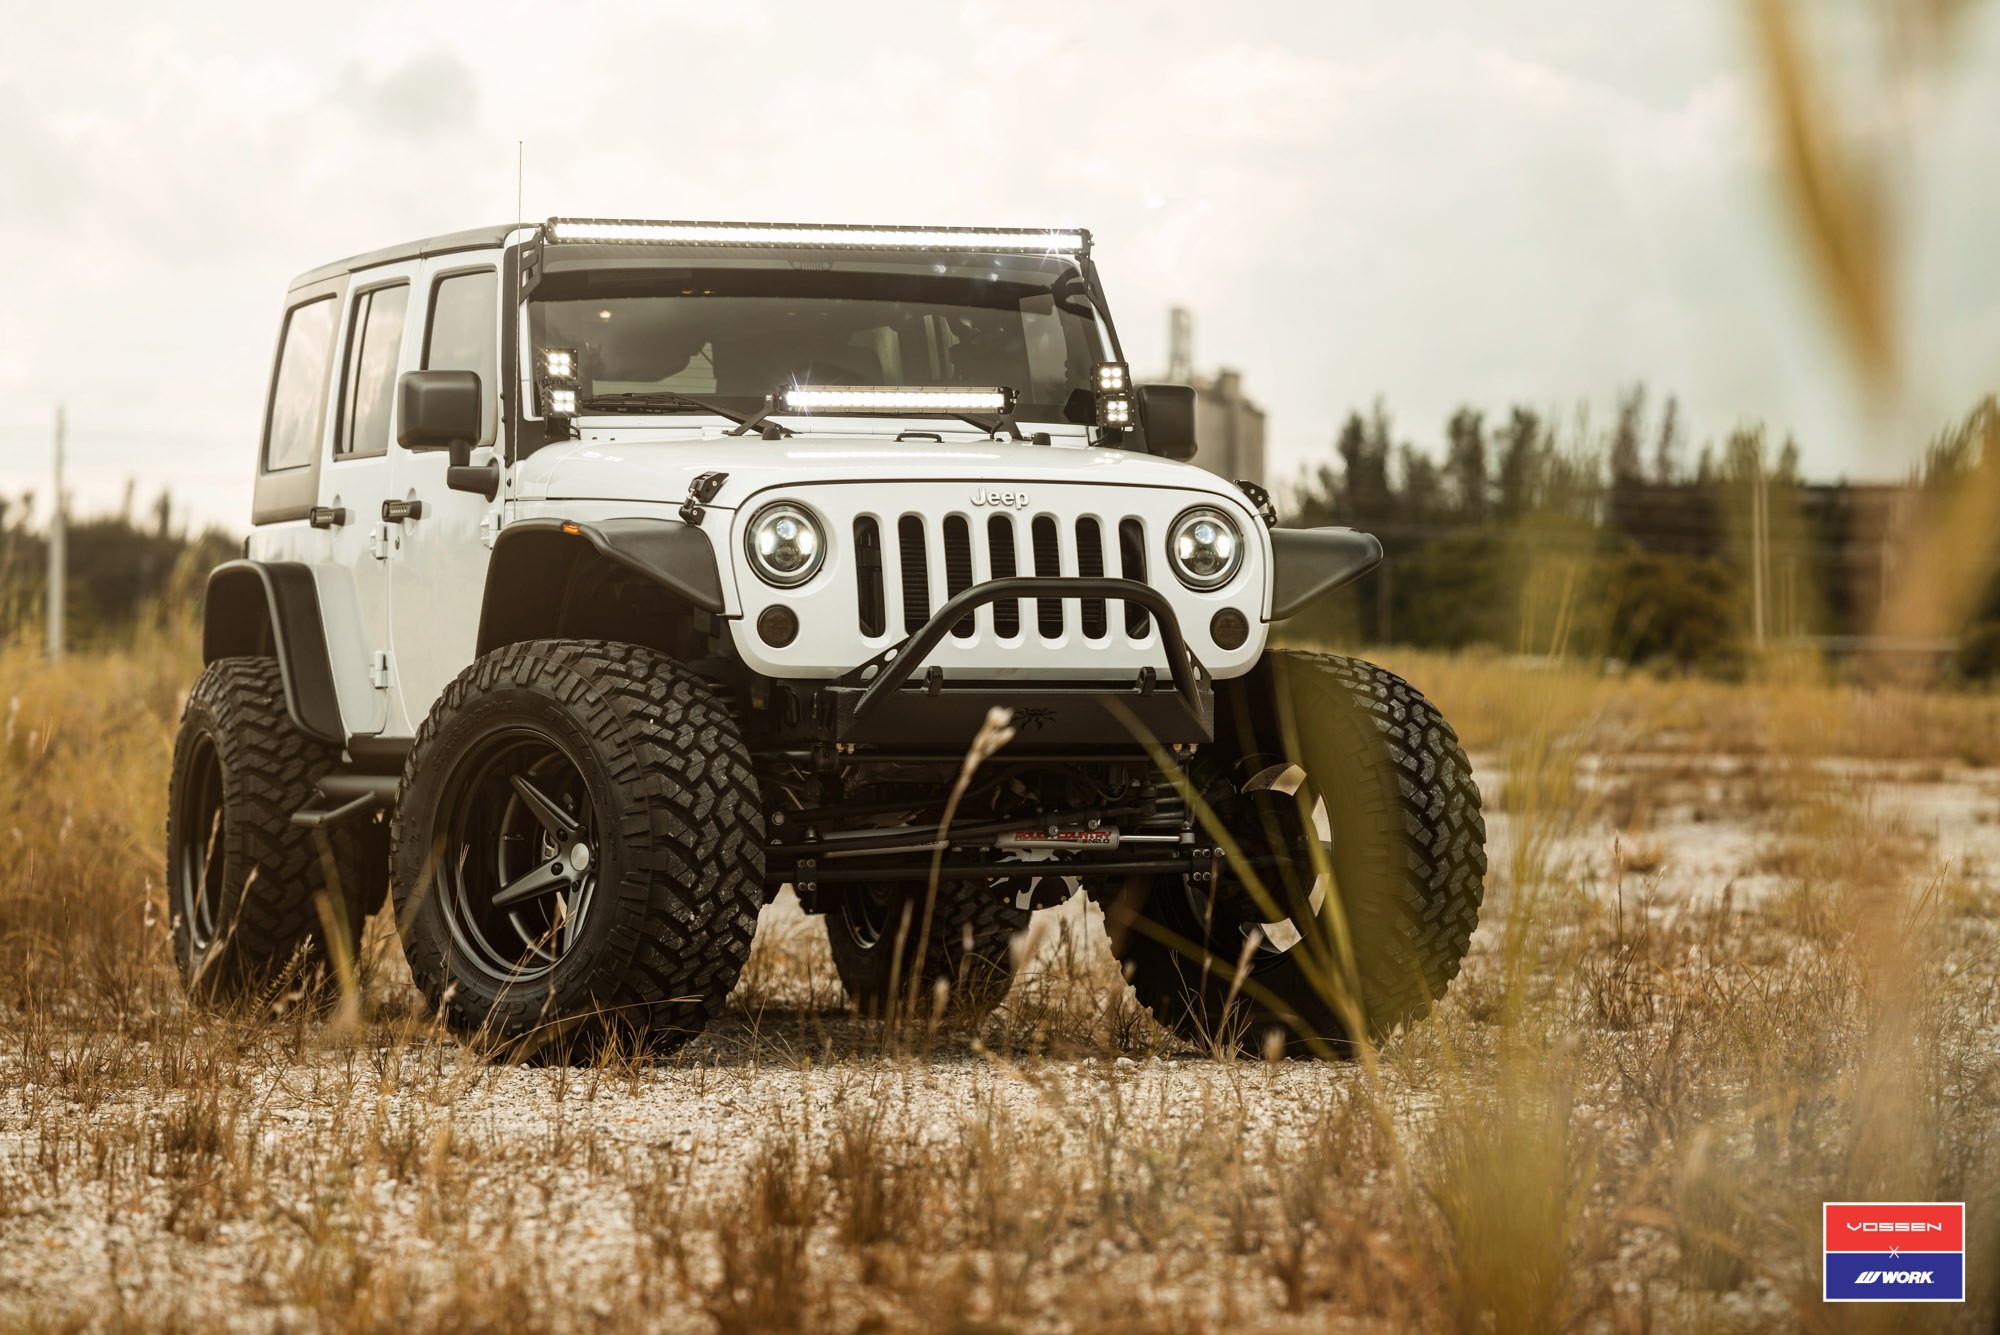 Super Clean JK with Cut-out Aluminum Fenders and Stinger Bumper on 37s - Photo by Vossen